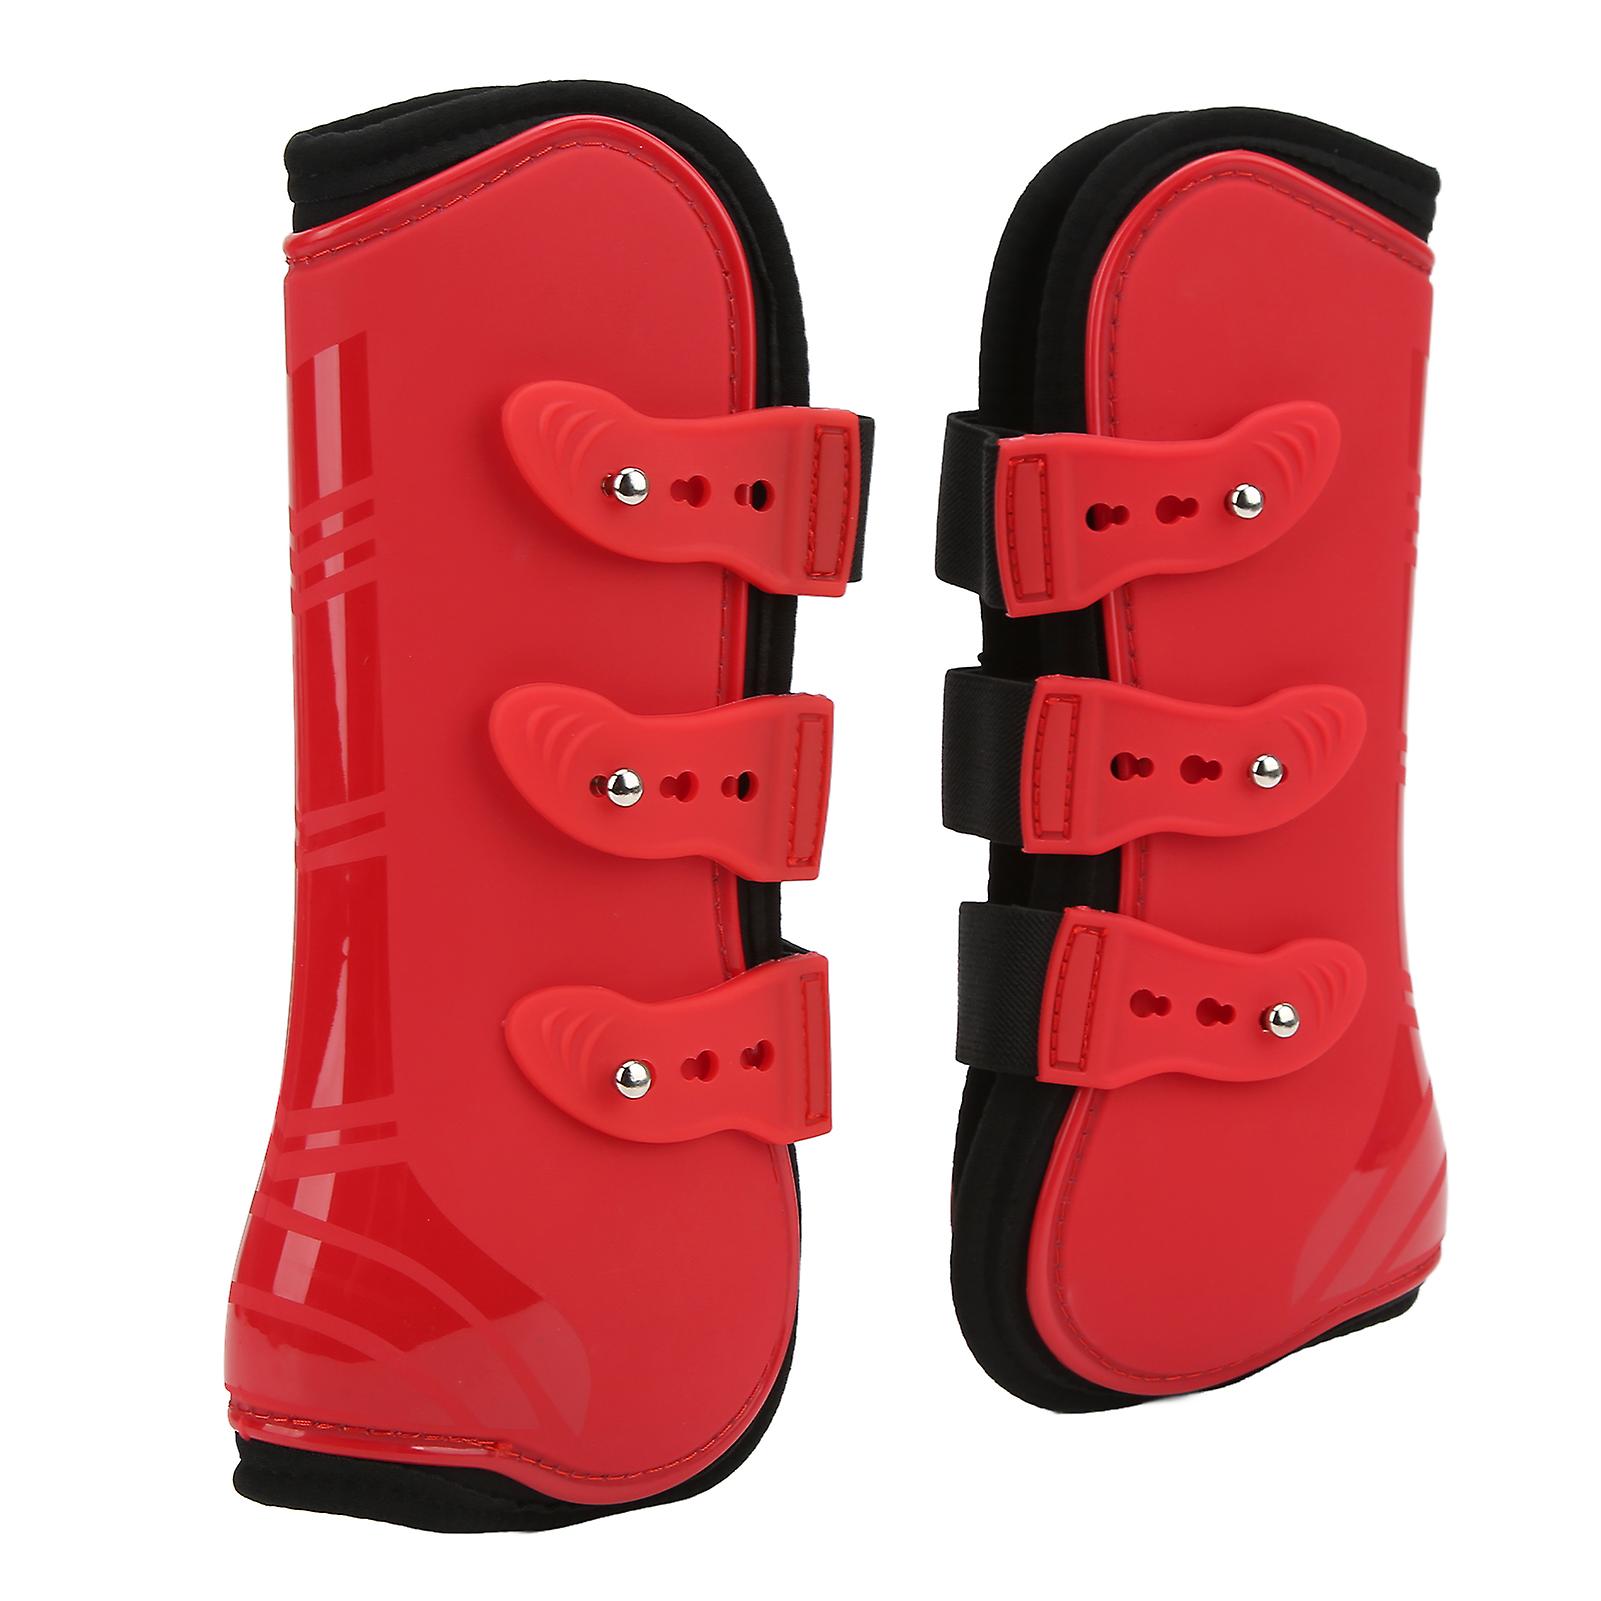 2pcs Horse Front Tendon Boots Adjustable Horse Front Legs Support Boots For Training Racingred Front Legs L